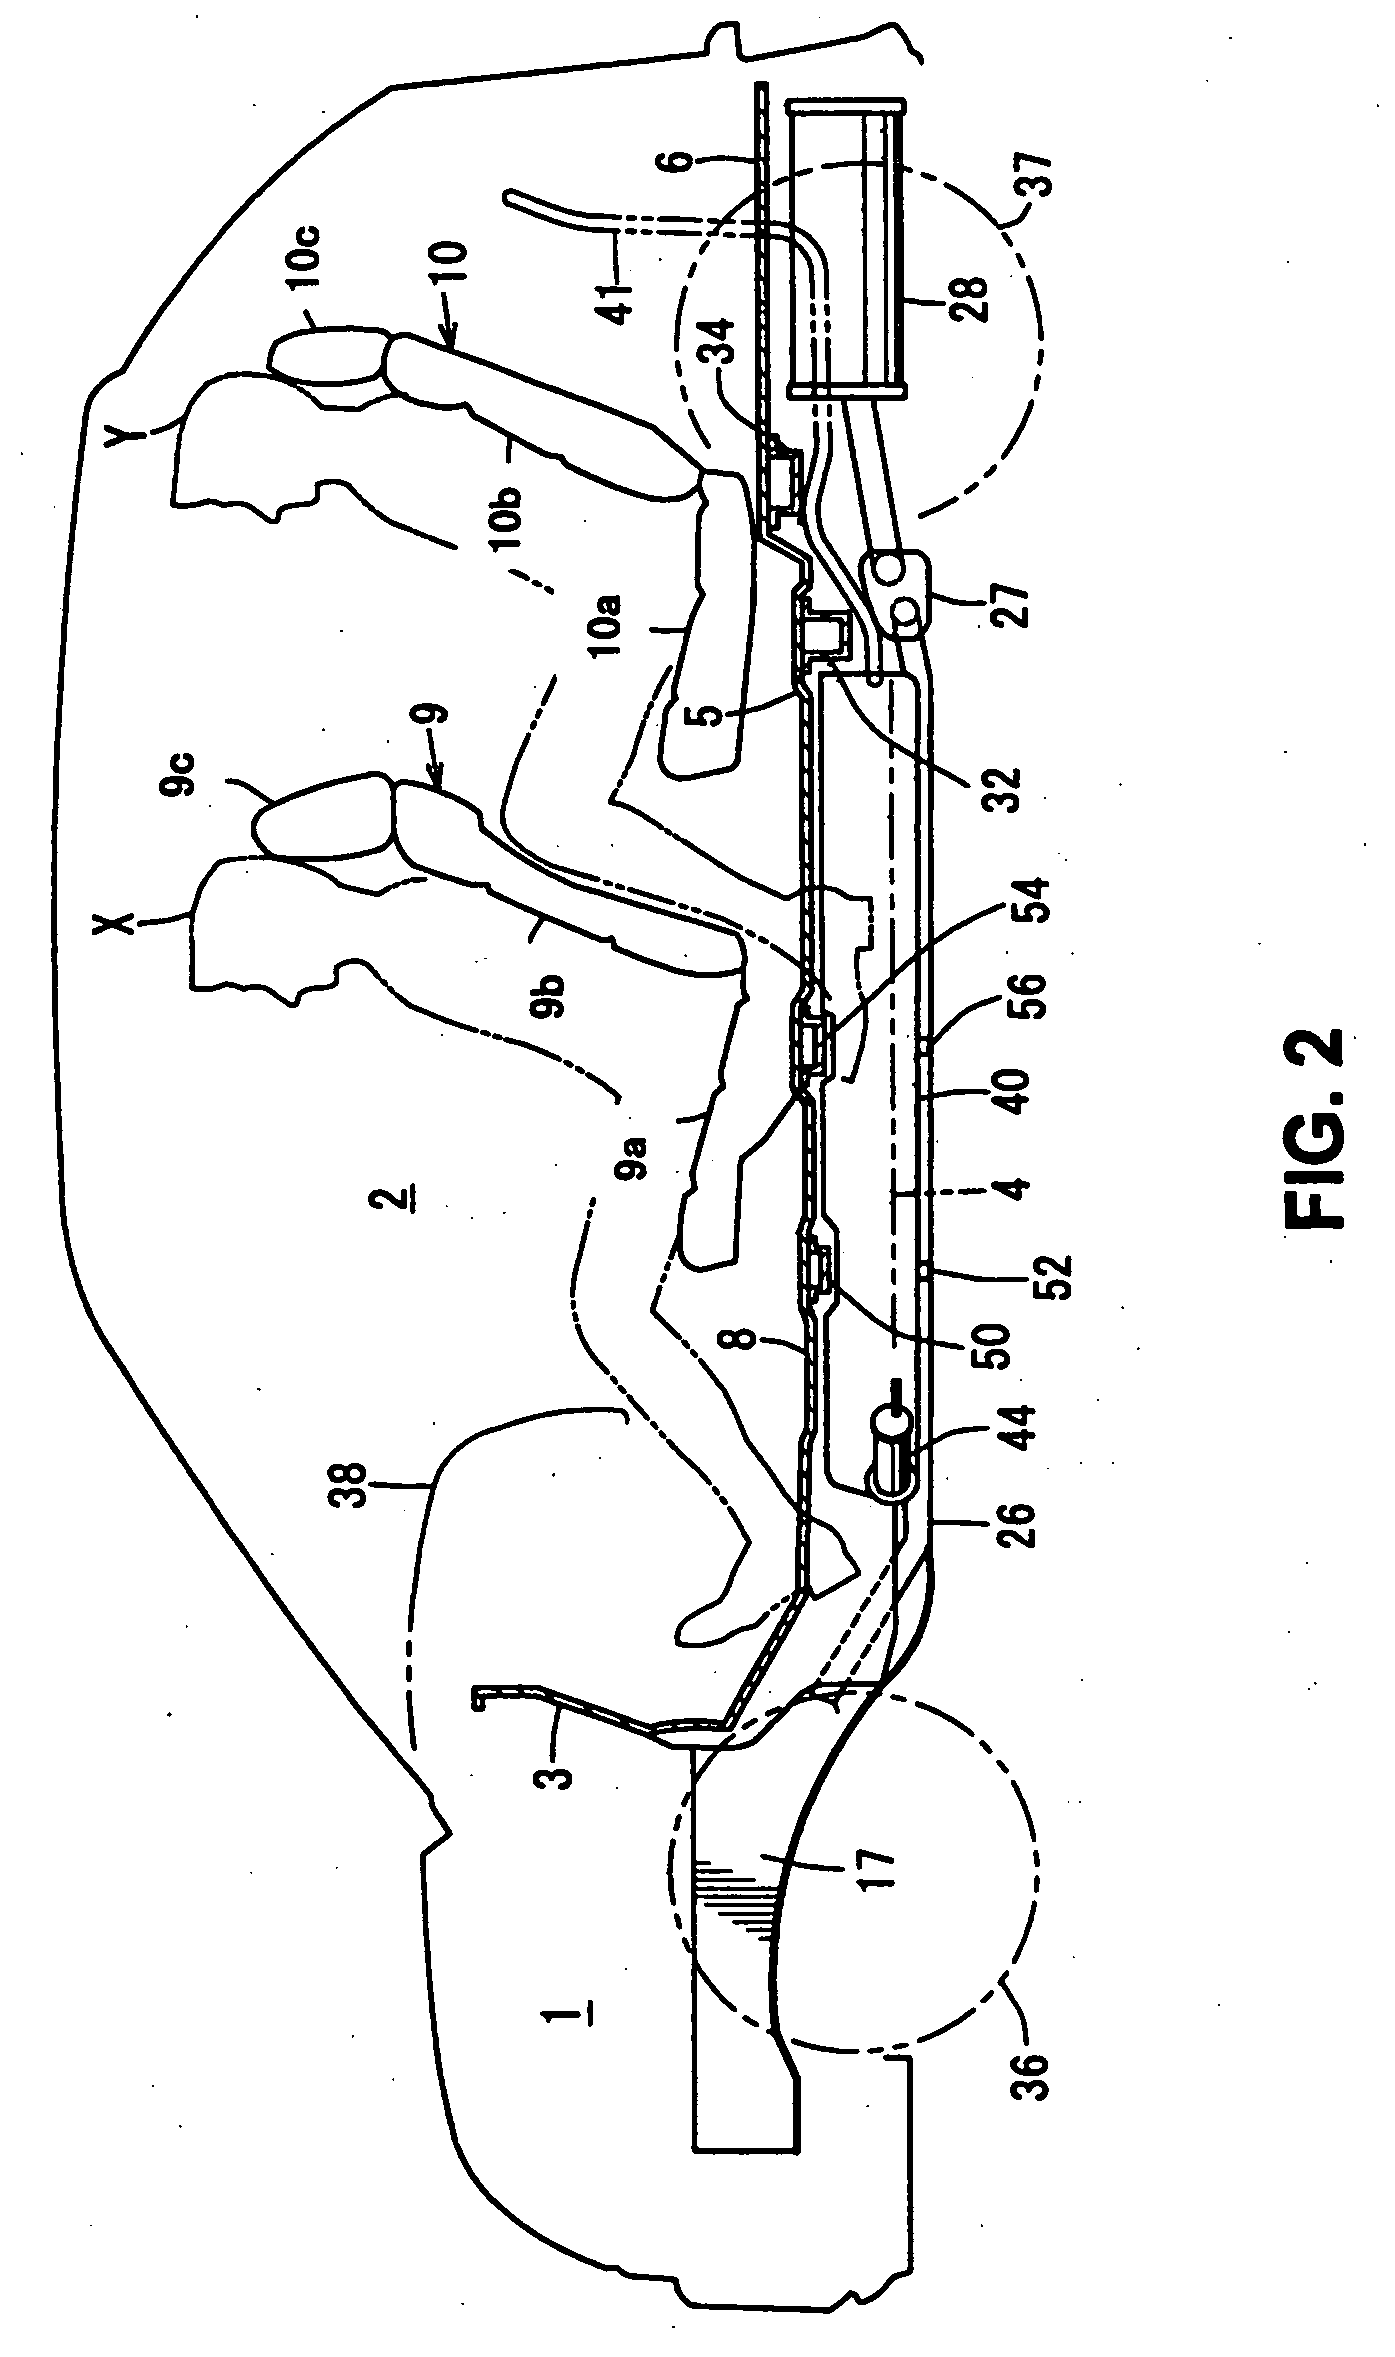 Fuel tank disposition structure of vehicle